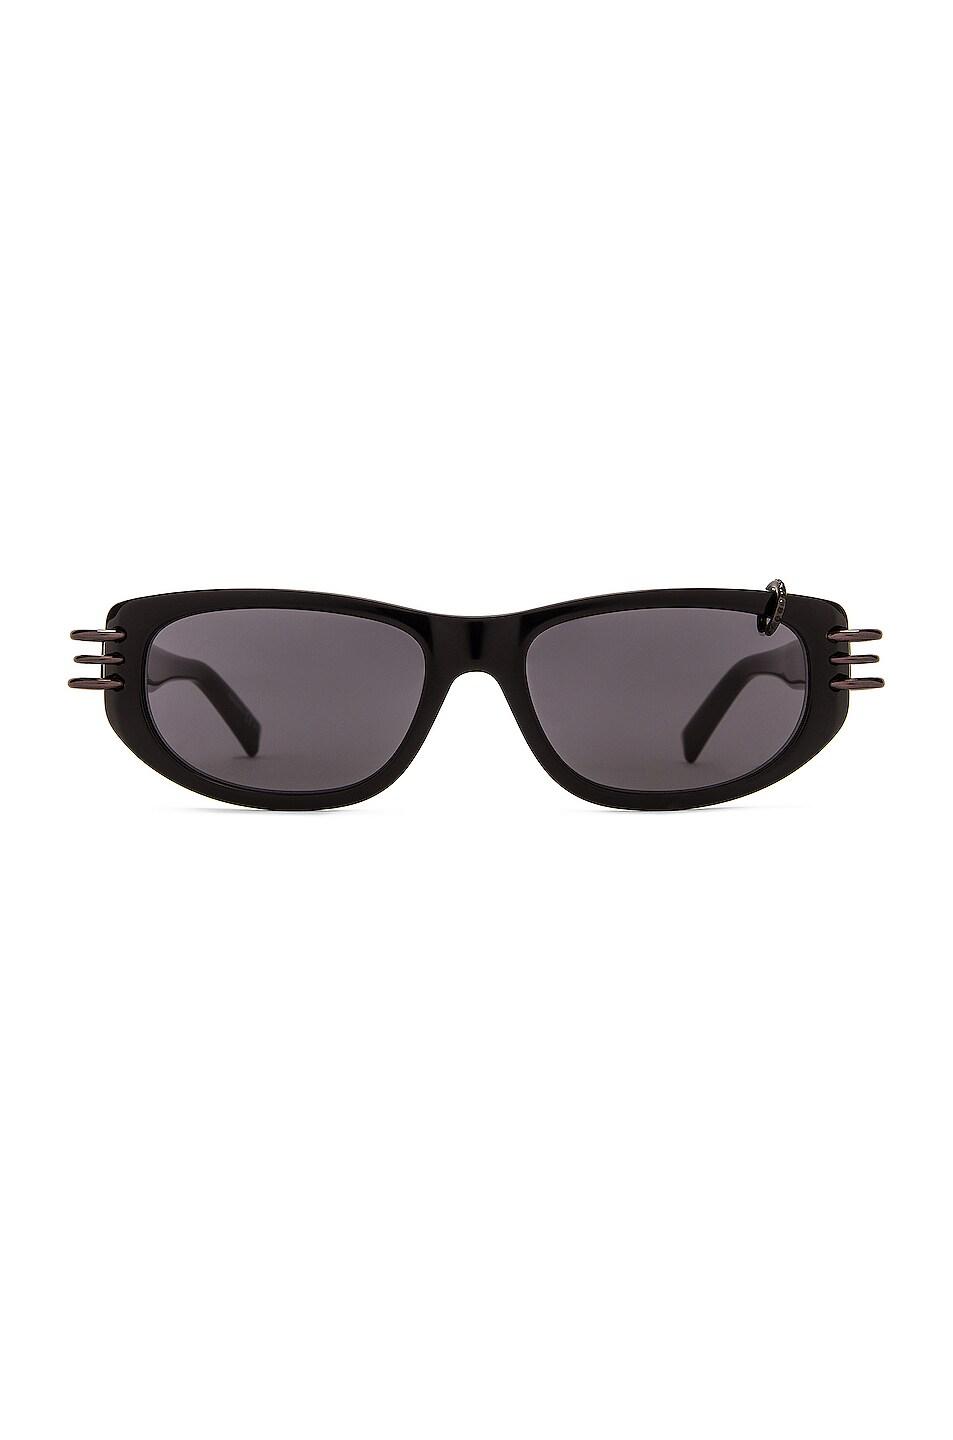 Givenchy Pierced Sunglasses in Black | Lyst